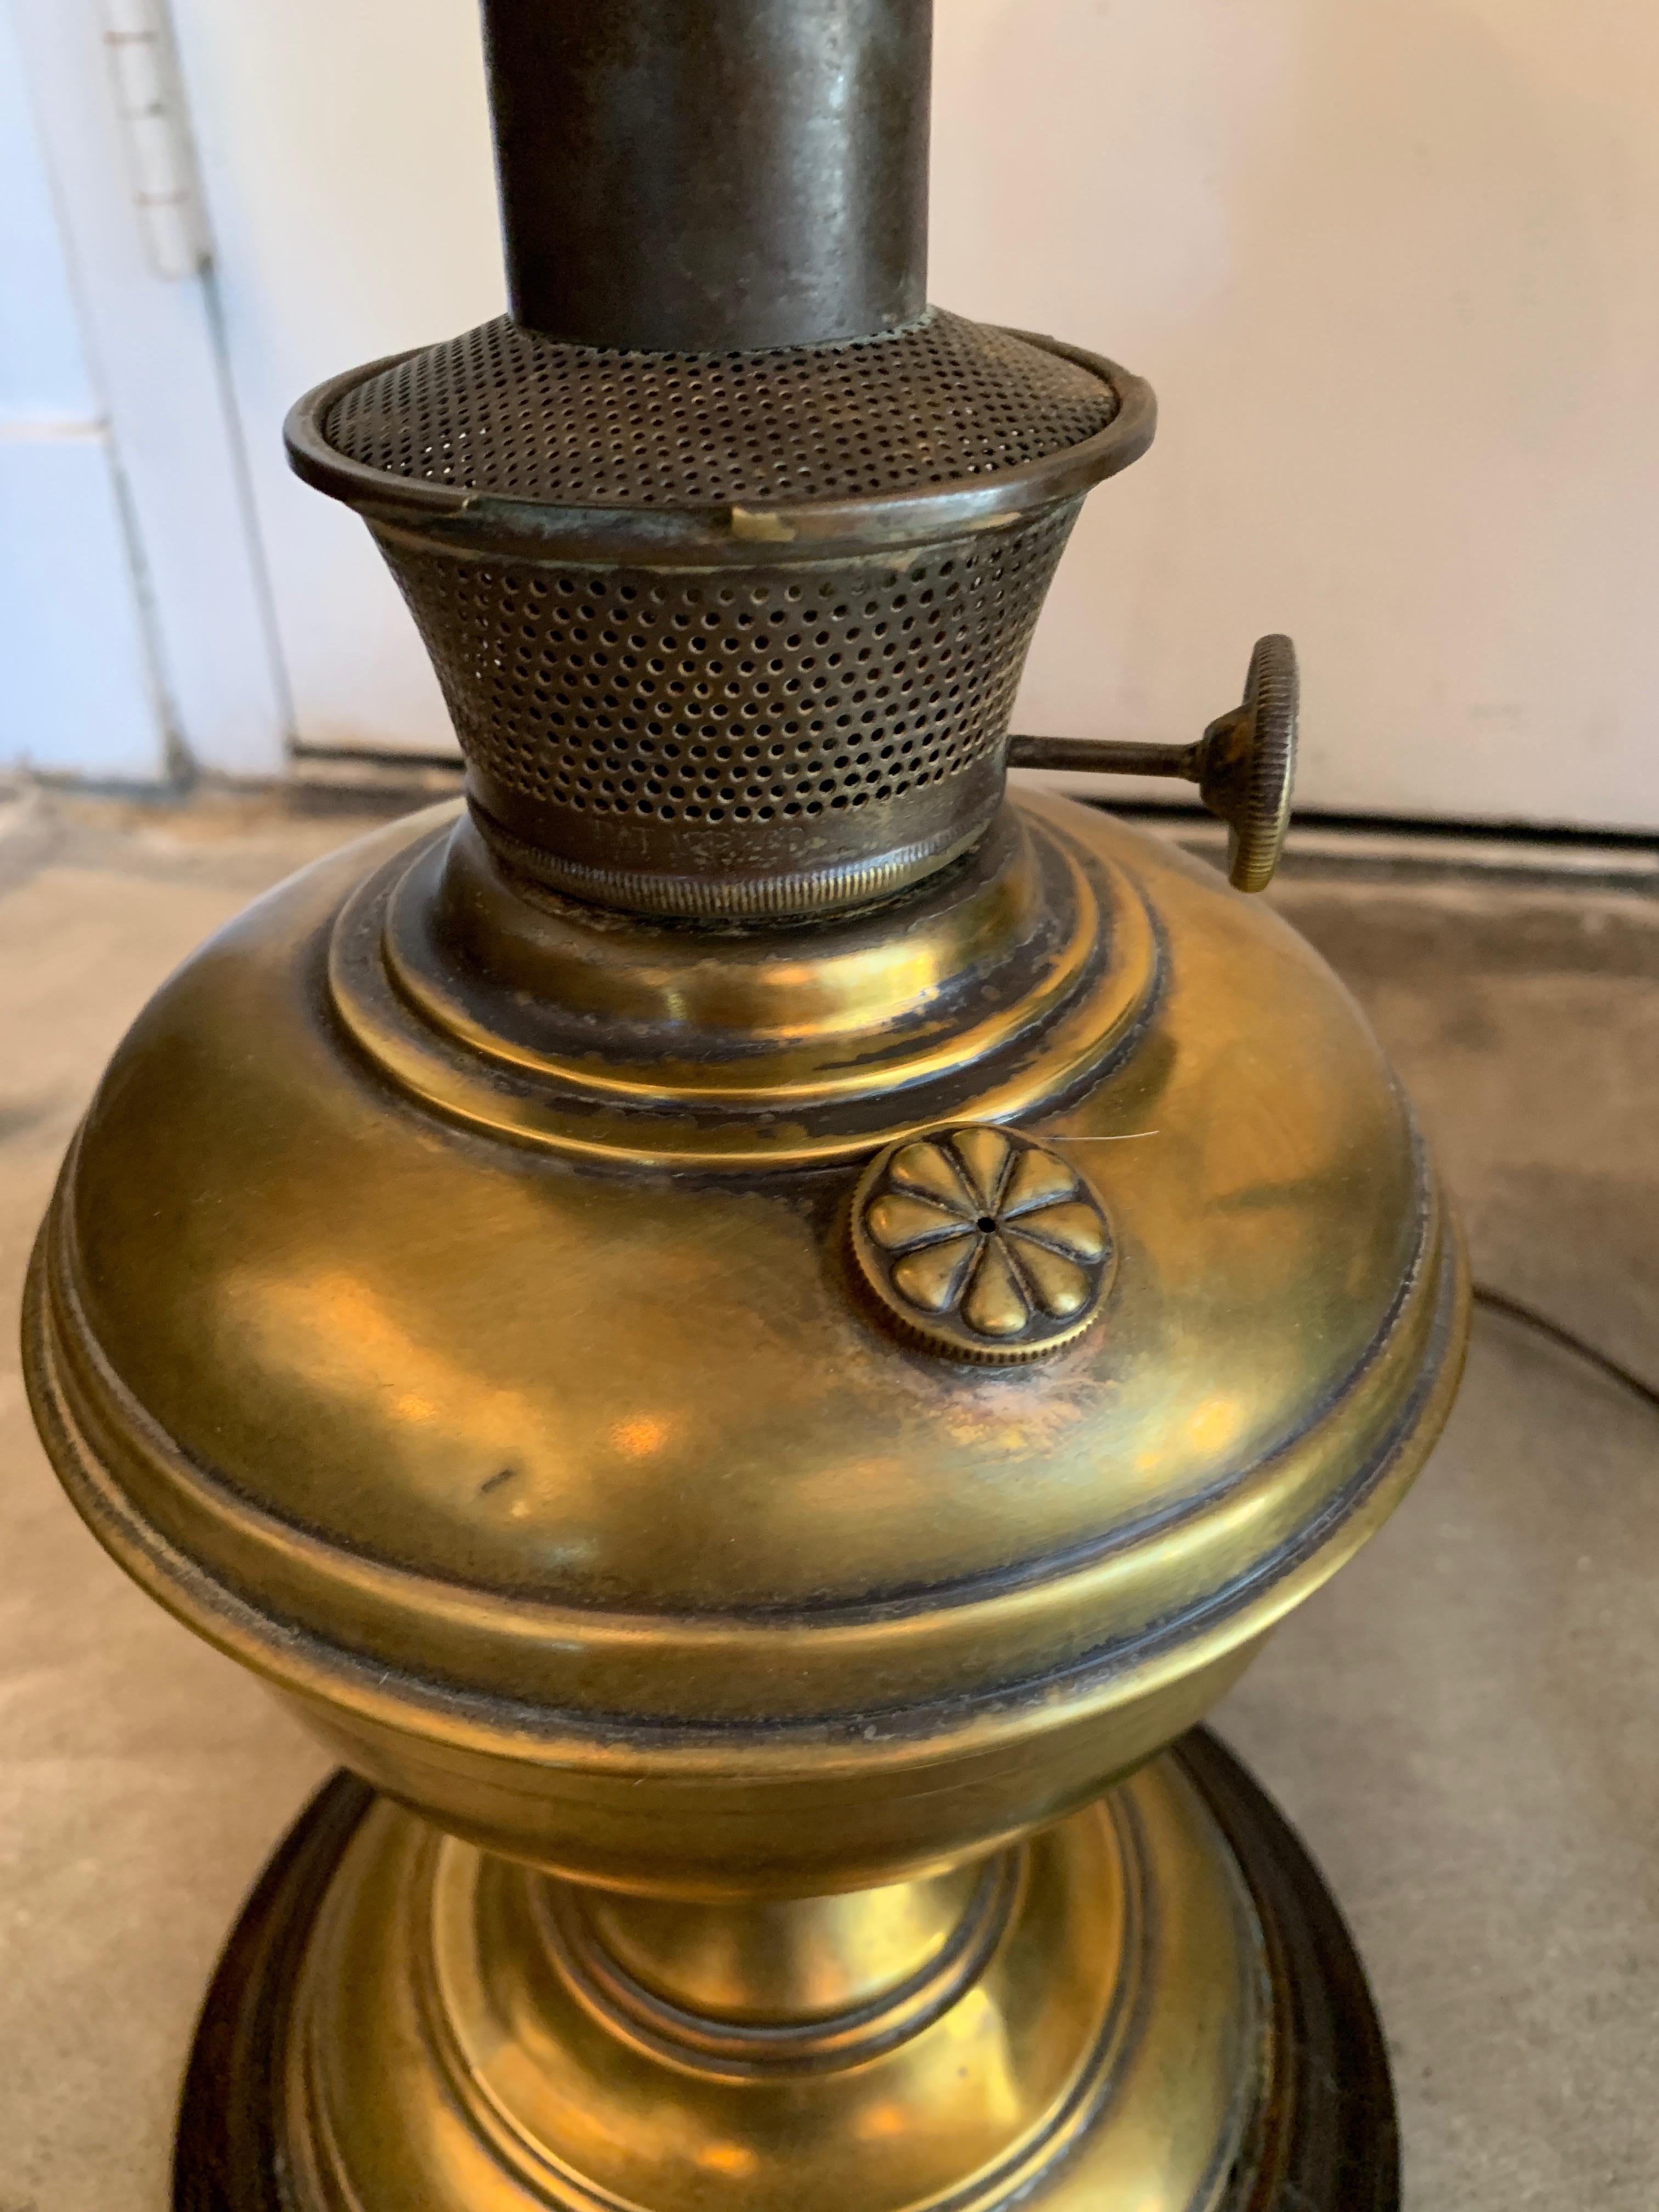 Tall brass lamps with wood base and decorative knobs. All original pieces with new shades. Knob is stamped with Beacon Home Supply Co, Kansas City MD. Look to be renovated gas lamps, a gorgeous find. Measurements given with shade. Sold as a pair.